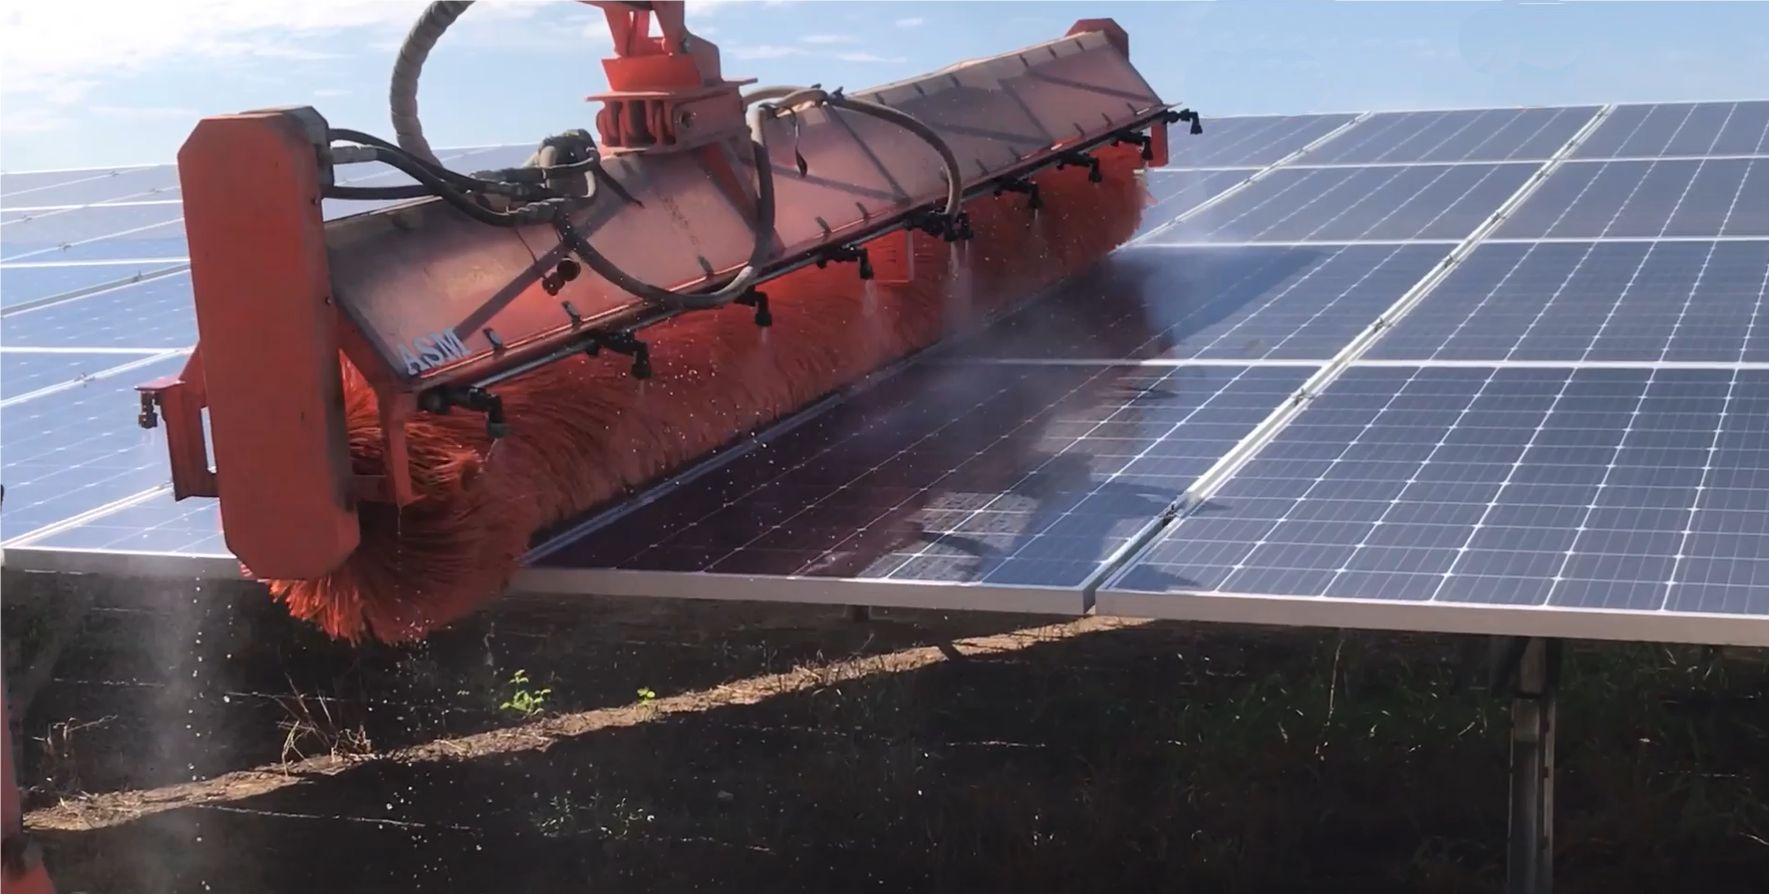 A close-up shot of a solar farm cleaning machine.